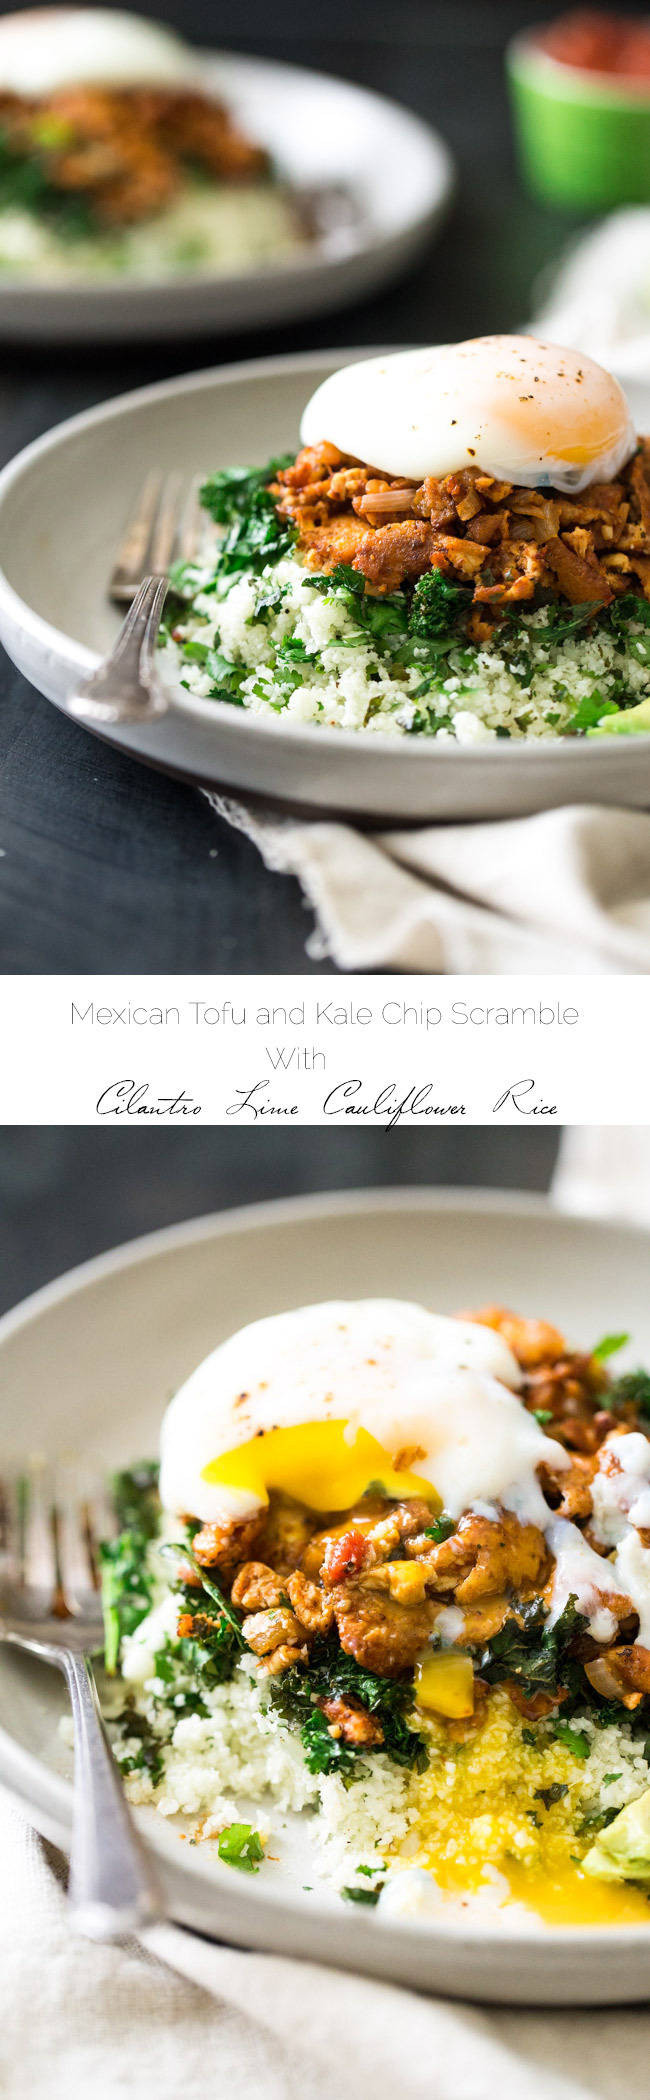 Mexican Tofu Recipes
 Mexican Tofu Scramble with Cauliflower Rice and Kale The